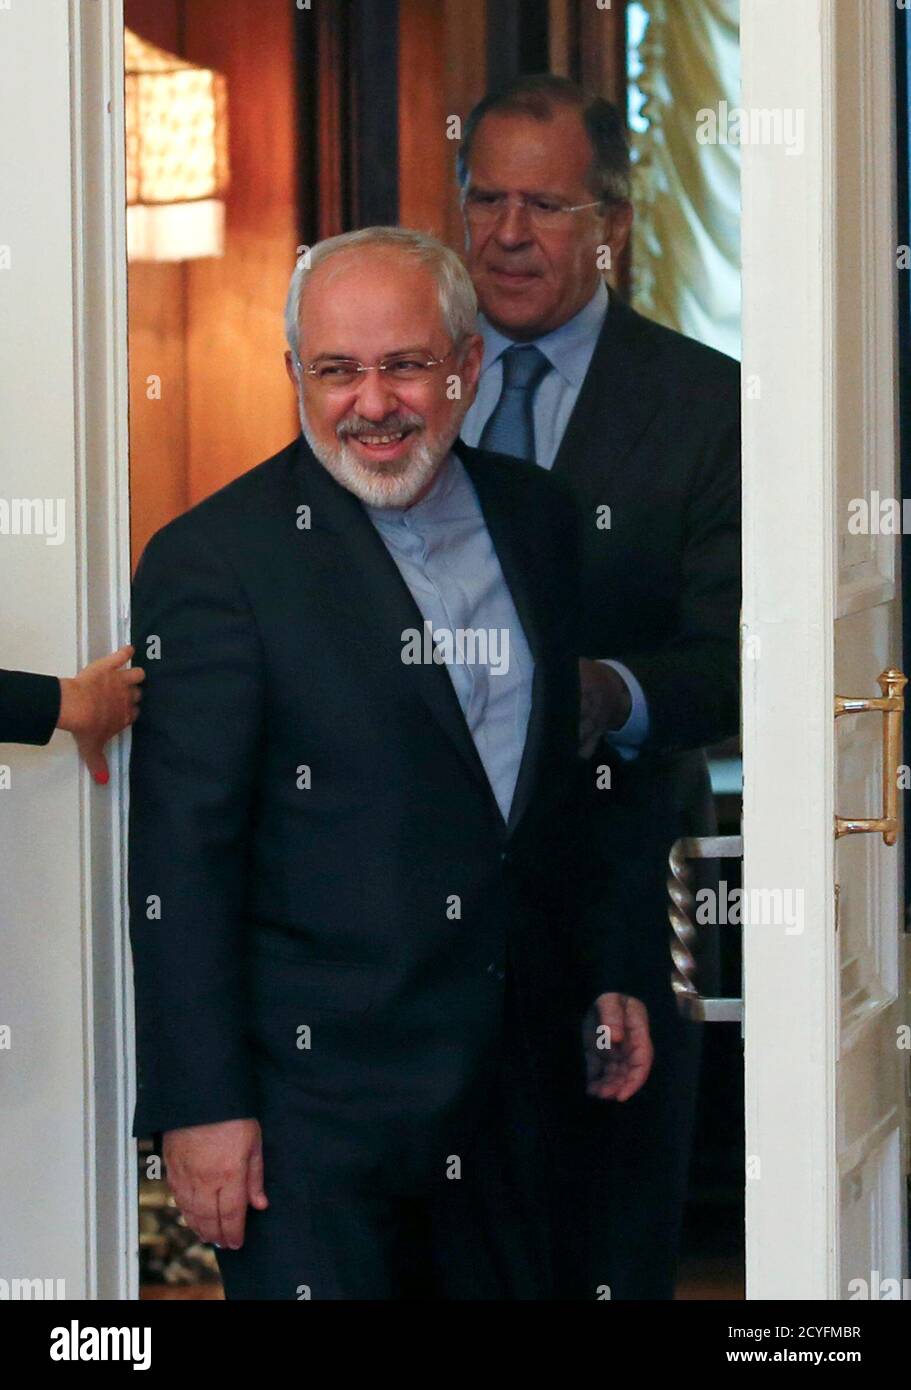 Iranian Foreign Minister Mohammad Javad Zarif (front) and his Russian counterpart Sergei Lavrov walk into a hall during a meeting in Moscow, August 29, 2014. Russia said on Thursday the possibility of lifting sanctions on Iran had emerged thanks to international talks on Tehran's nuclear program and urged all countries involved to show political will to reach a deal. Iranian Foreign Minister Mohammad Javad Zarif will meet his Russian counterpart Sergei Lavrov in Moscow on Friday to discuss the negotiations with six world powers on a decade-old stand-off over the Islamic Republic's nuclear ambi Stock Photo